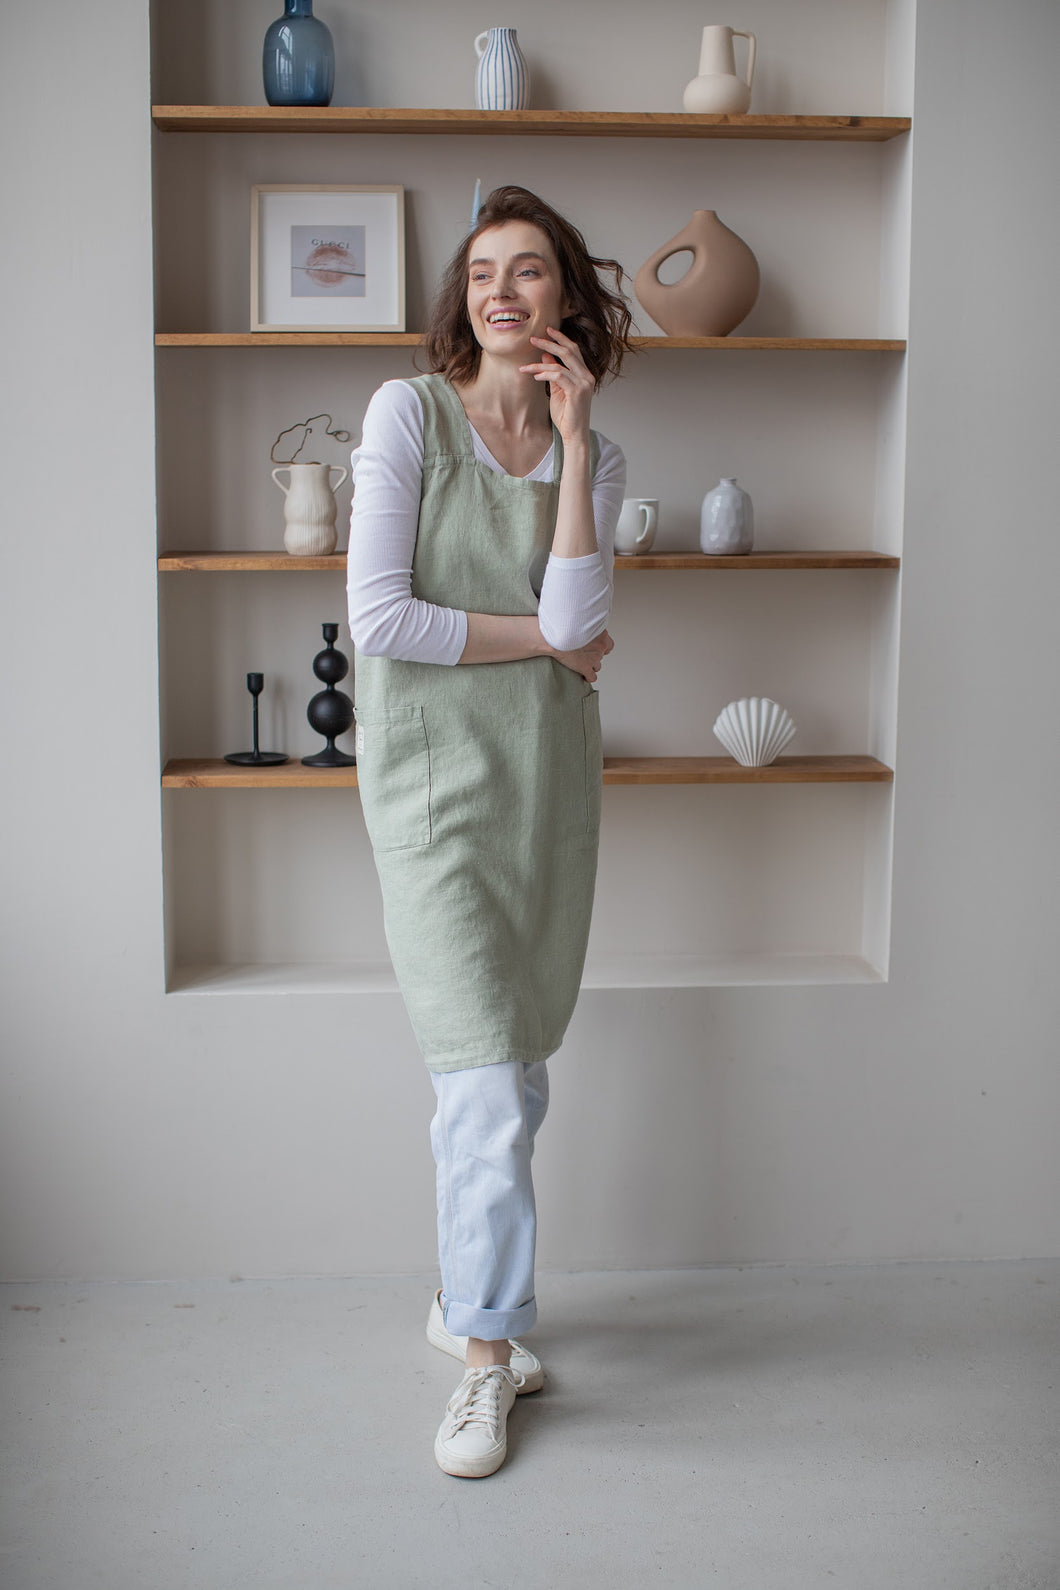 100% Linen Japanese Apron in Sage